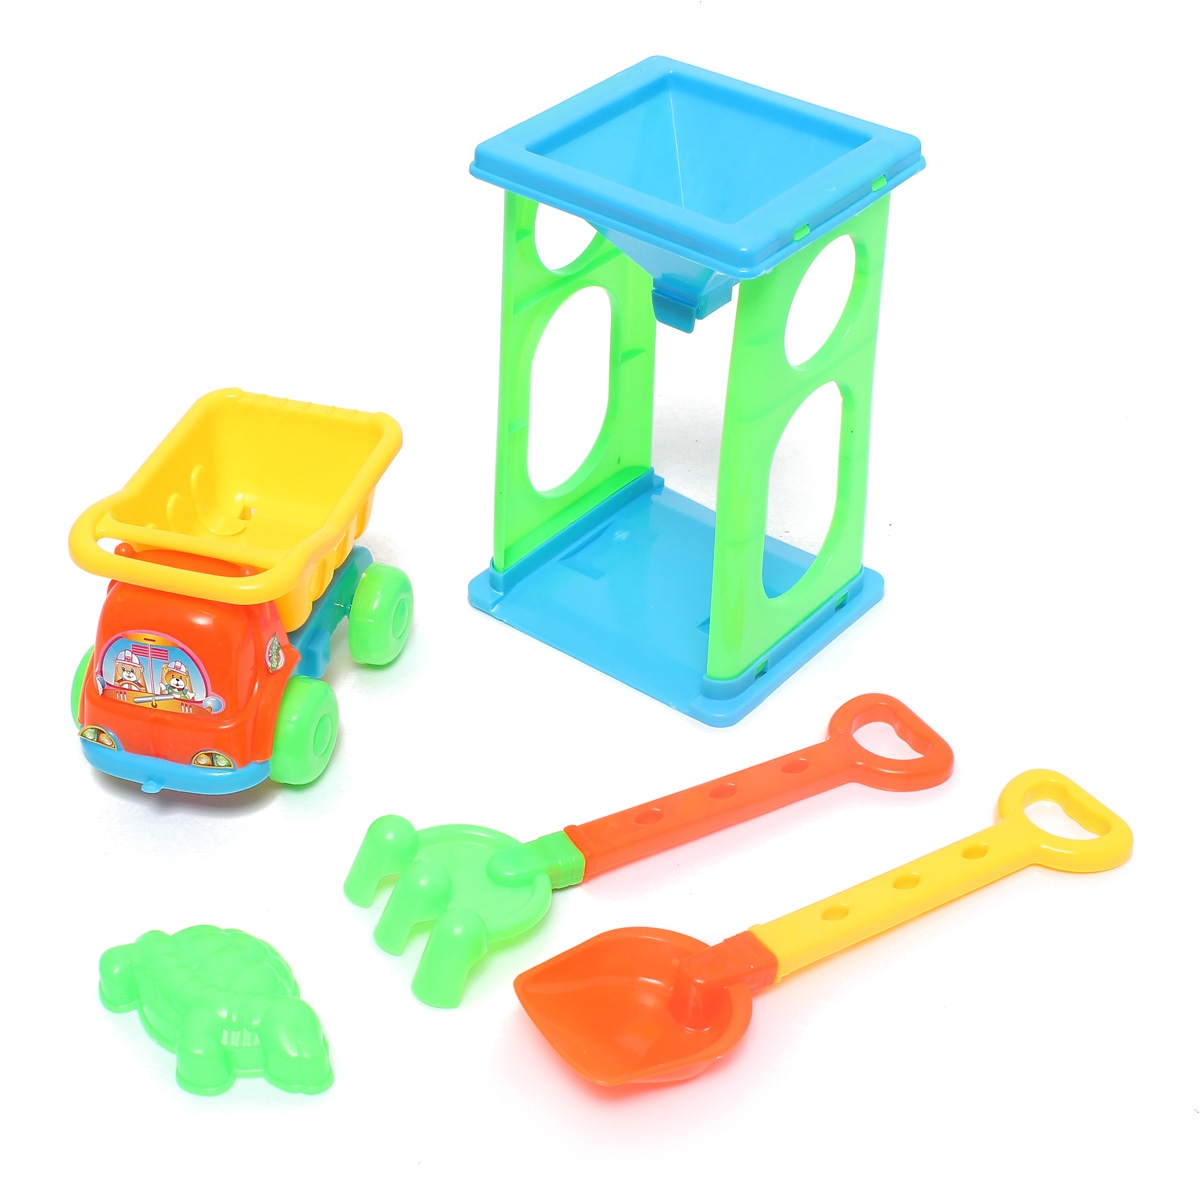 6 Pieces Seaside Beach Toy Trolley Shovel Set For Playing Sand And Water 